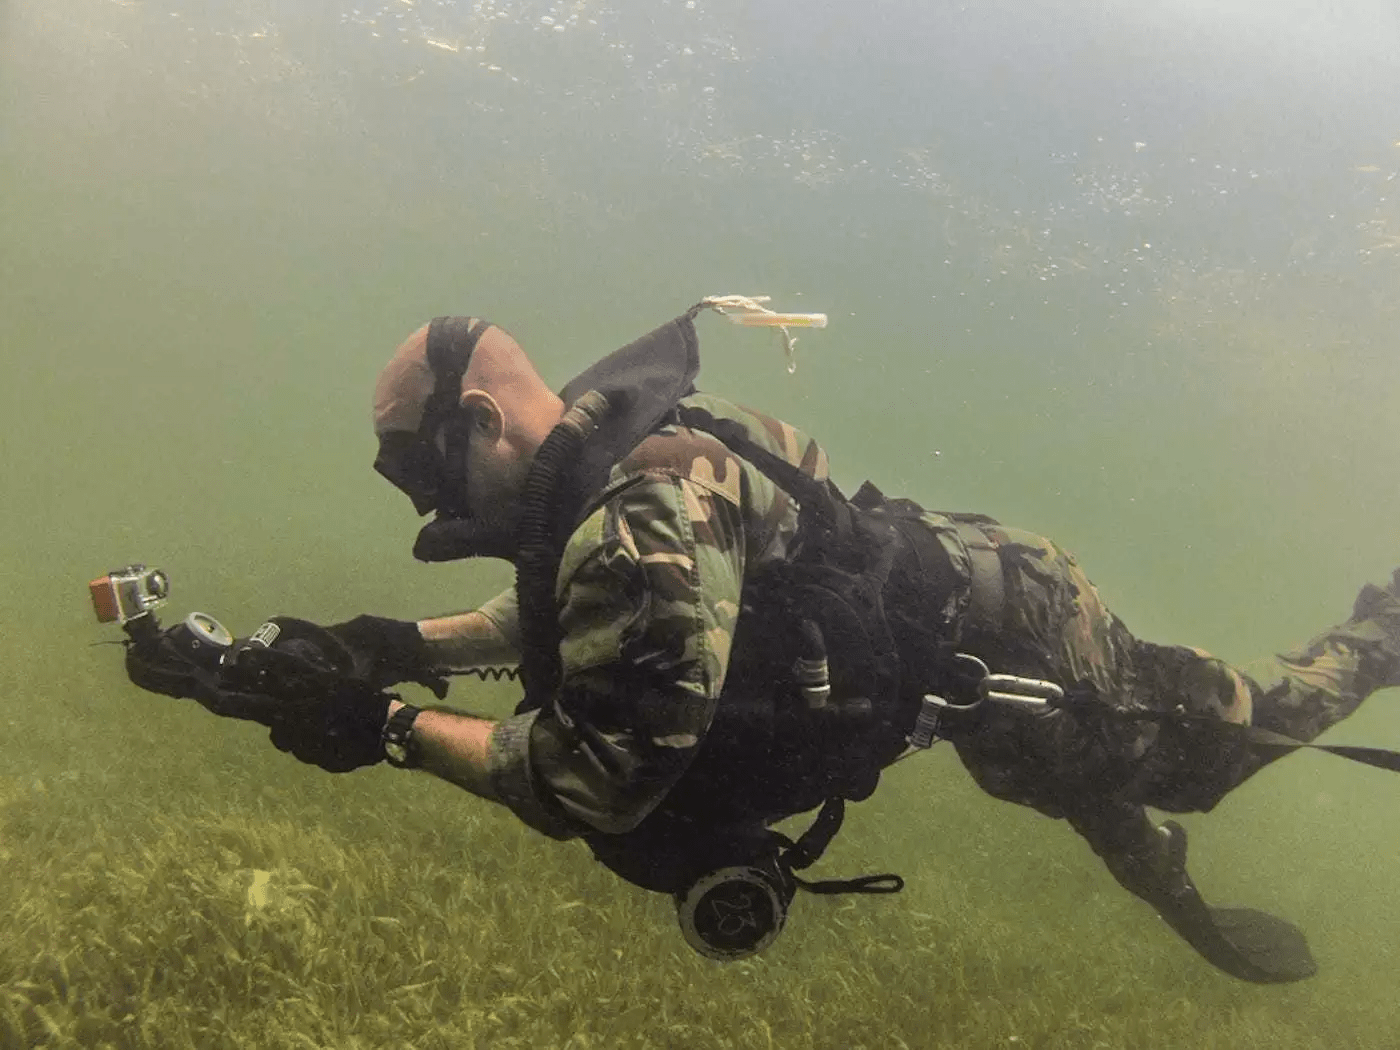 A SEAL diver underwater